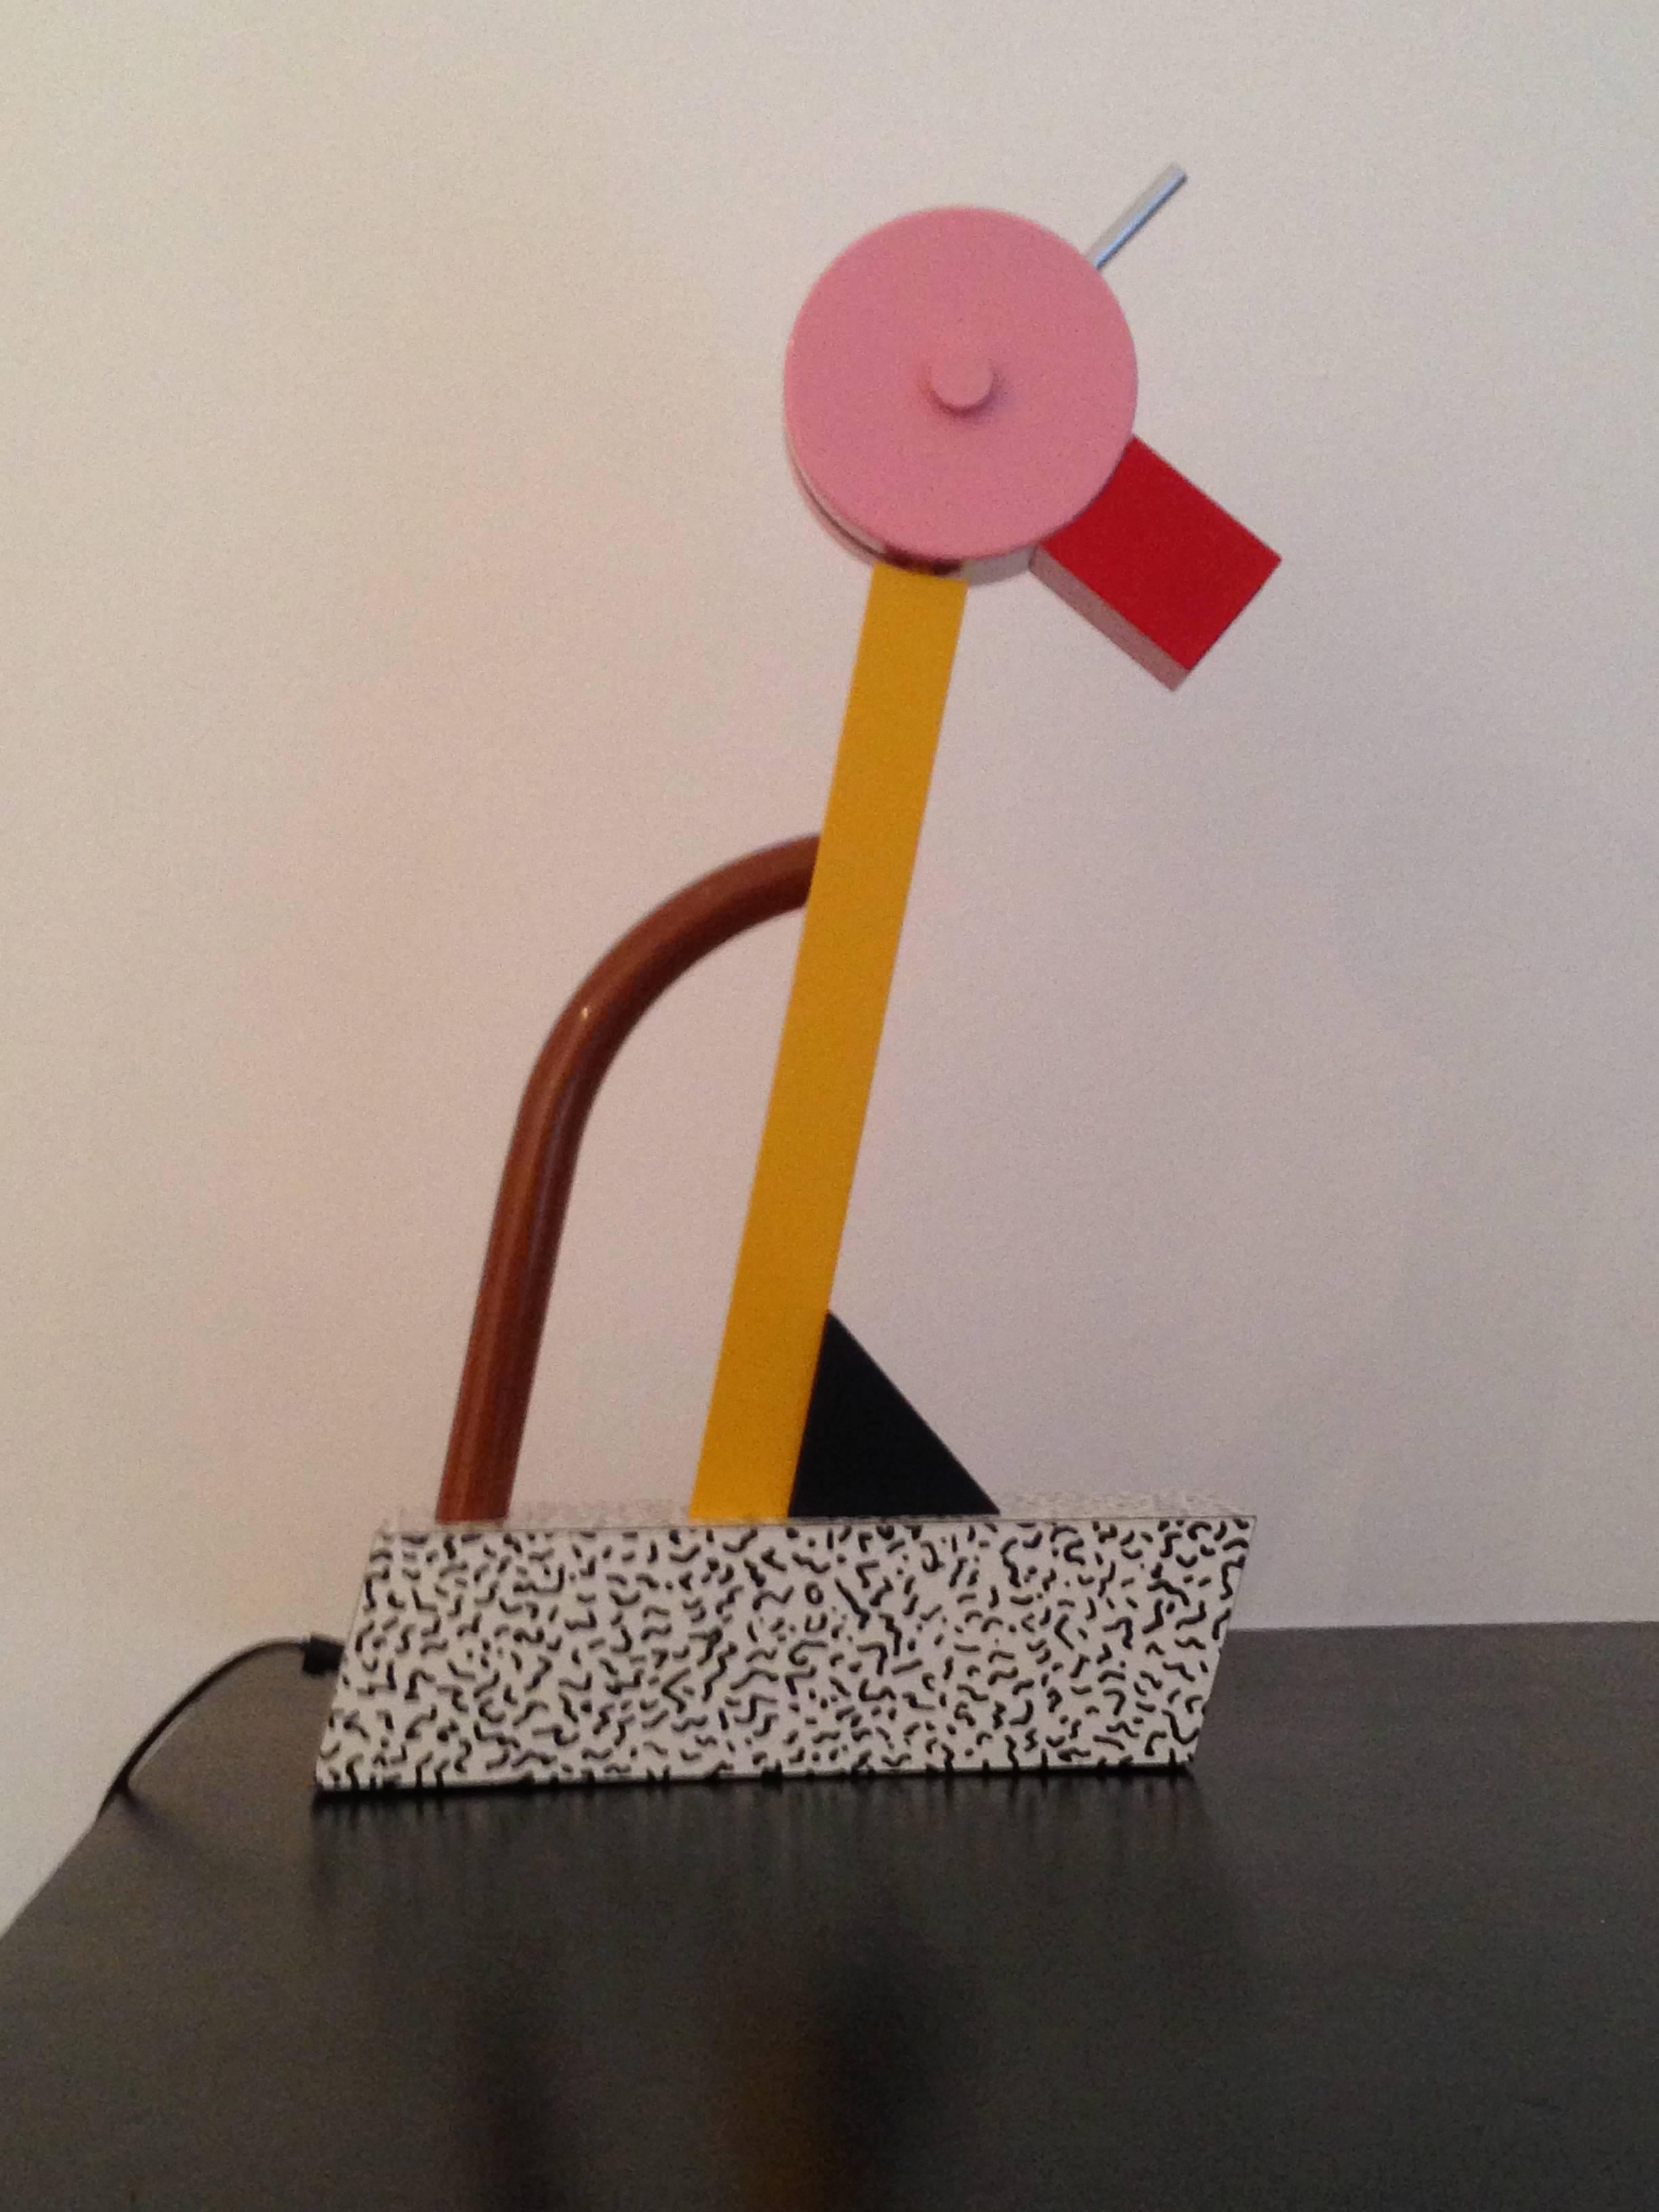 The ultimate Sottsass table light!! Anthropomorphic (looks like a parrot)!! Swivels up and down. His Sottsass-designed "Bacteriae" laminate on the base! An appendage at the back in an odd brown as a handle! A stainless grip on the pivoting